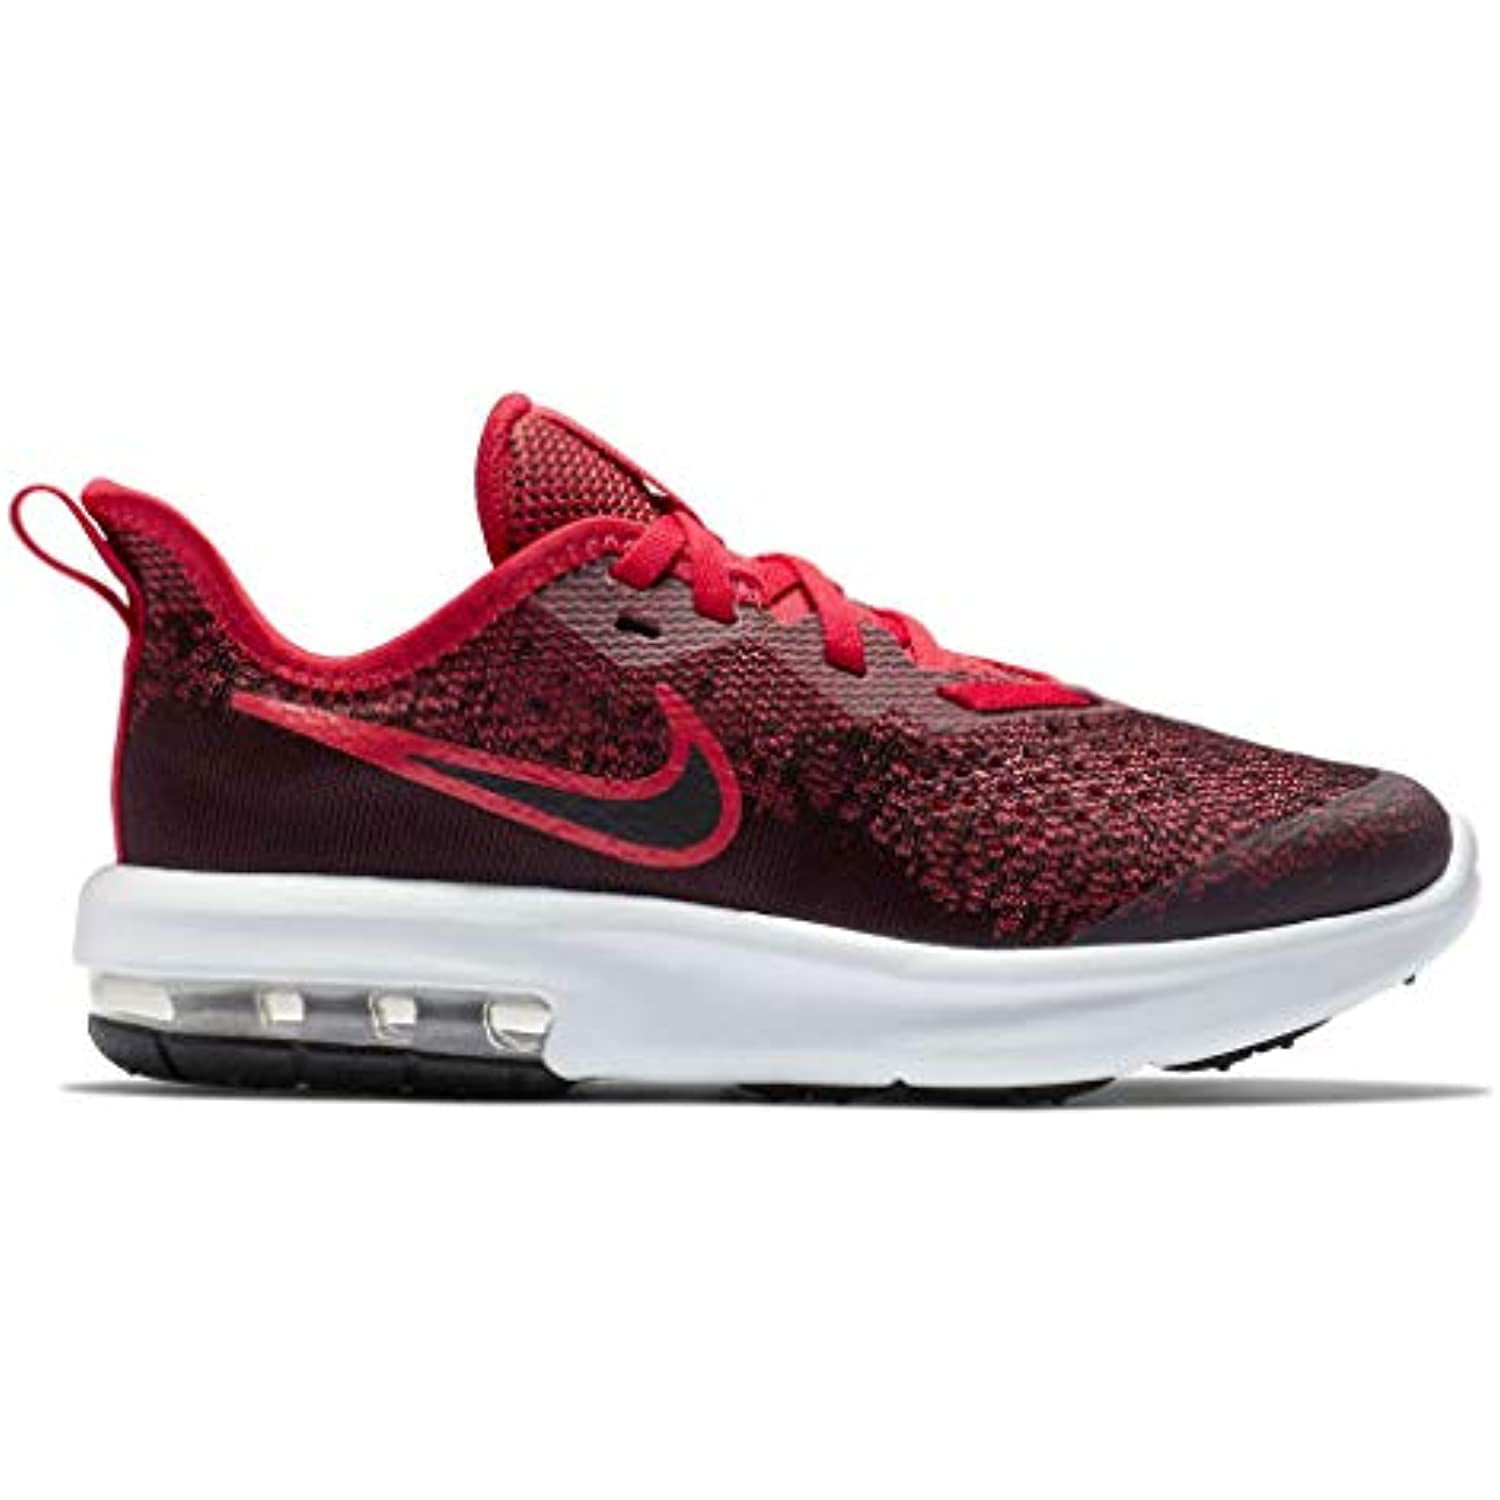 nike air max sequent 2 shoe carnival